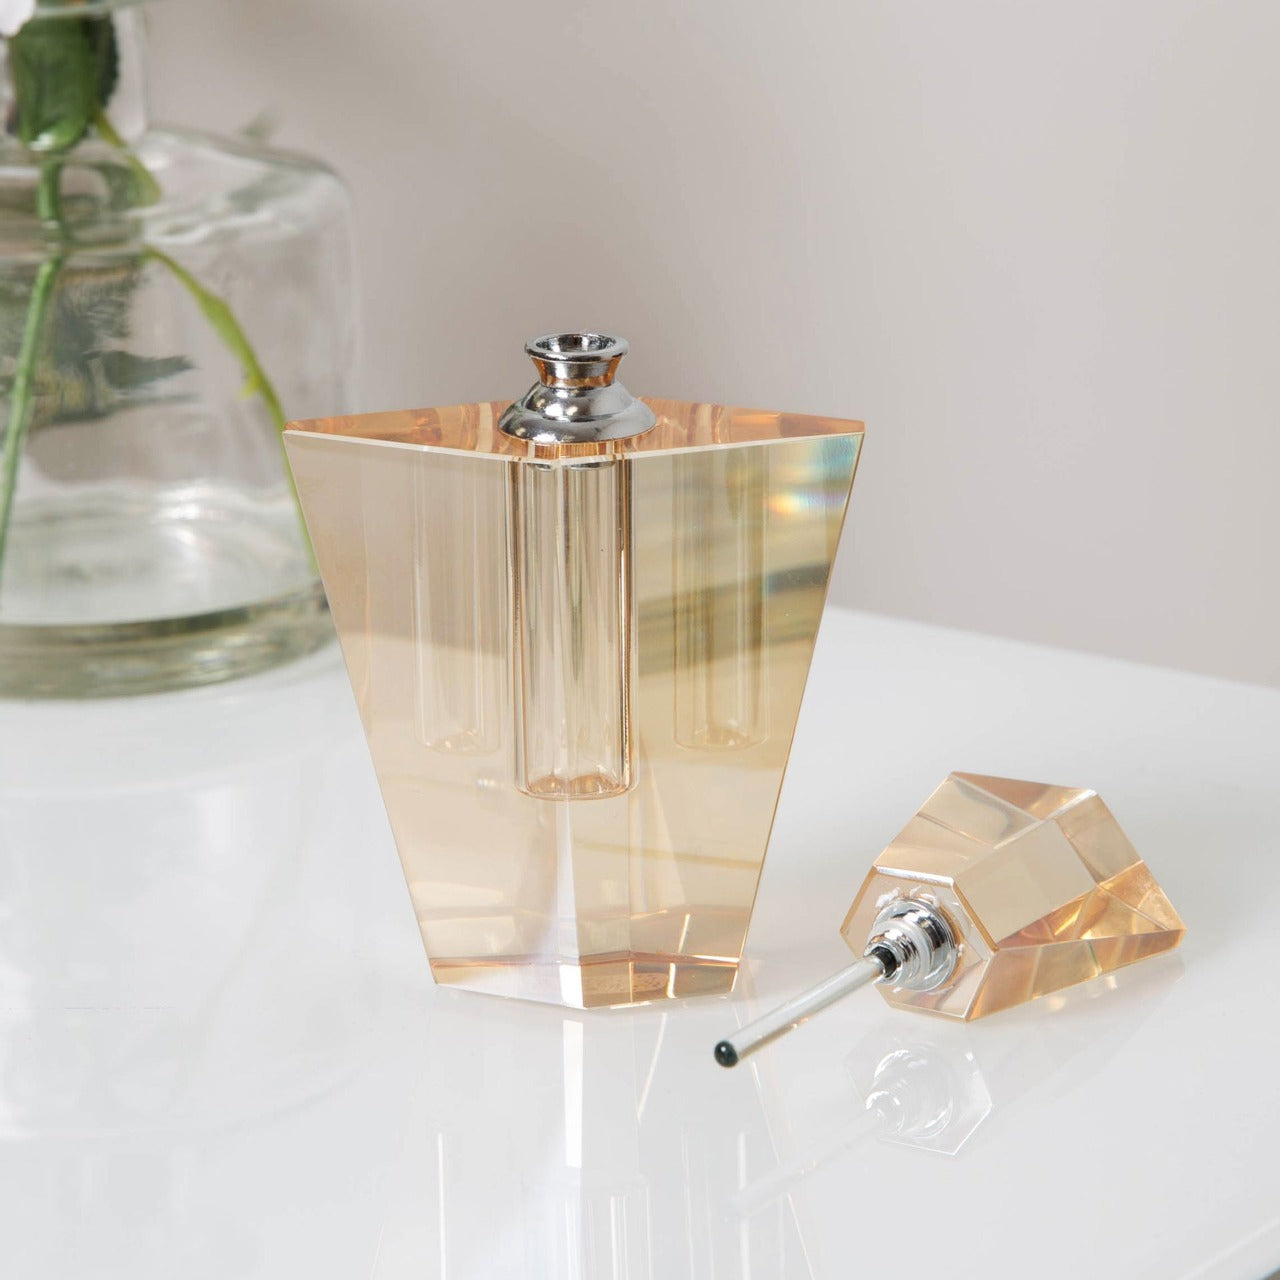 Estella Champagne Finish Glass Perfume Bottler  Bring some art deco elegance to your dressing table with this heavy champagne gold glass perfume bottle. From Estella by SOPHIA® - Champagne Chic women's home and gift evoking the luxurious spirit of the art deco era.